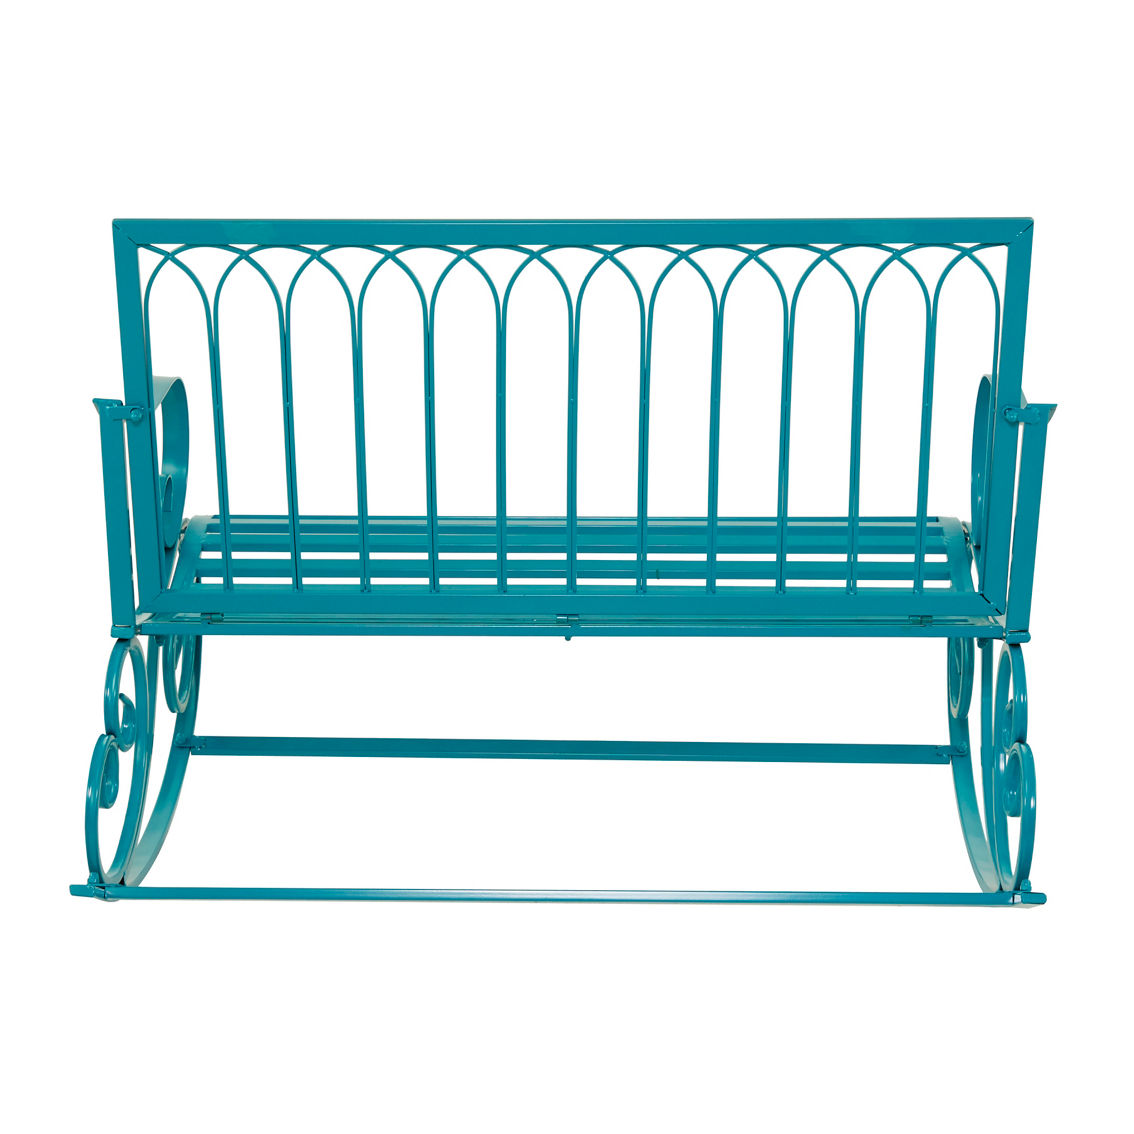 Morgan Hill Home Eclectic Teal Metal Outdoor Bench - Image 3 of 5